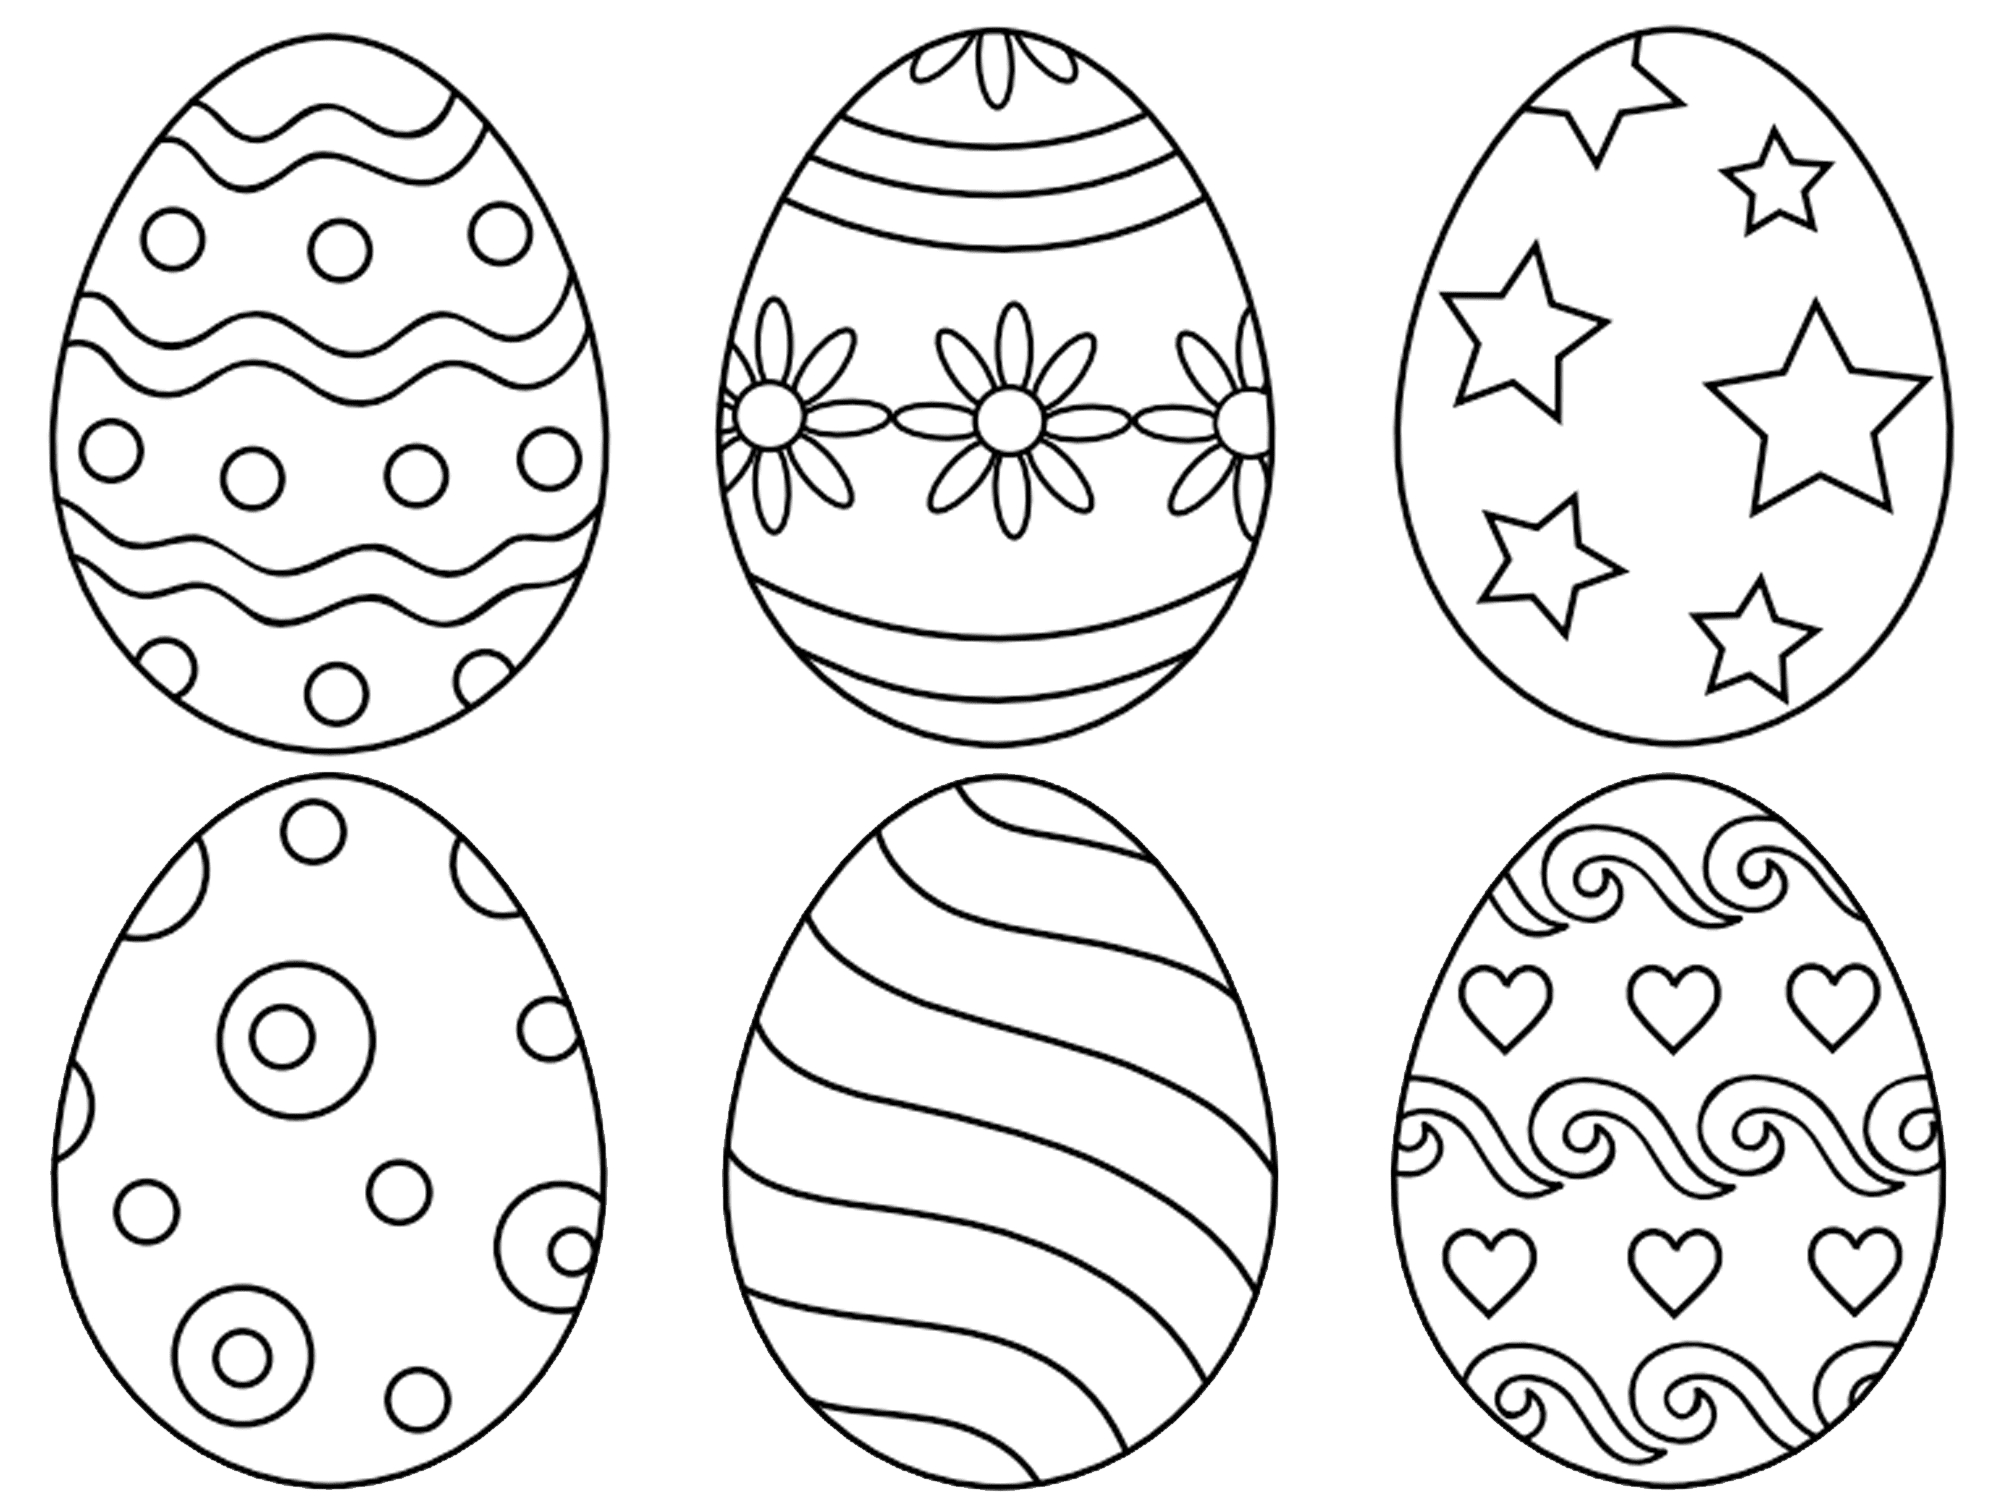 271 Free, Printable Easter Egg Coloring Pages - Free Printable Easter Stuff